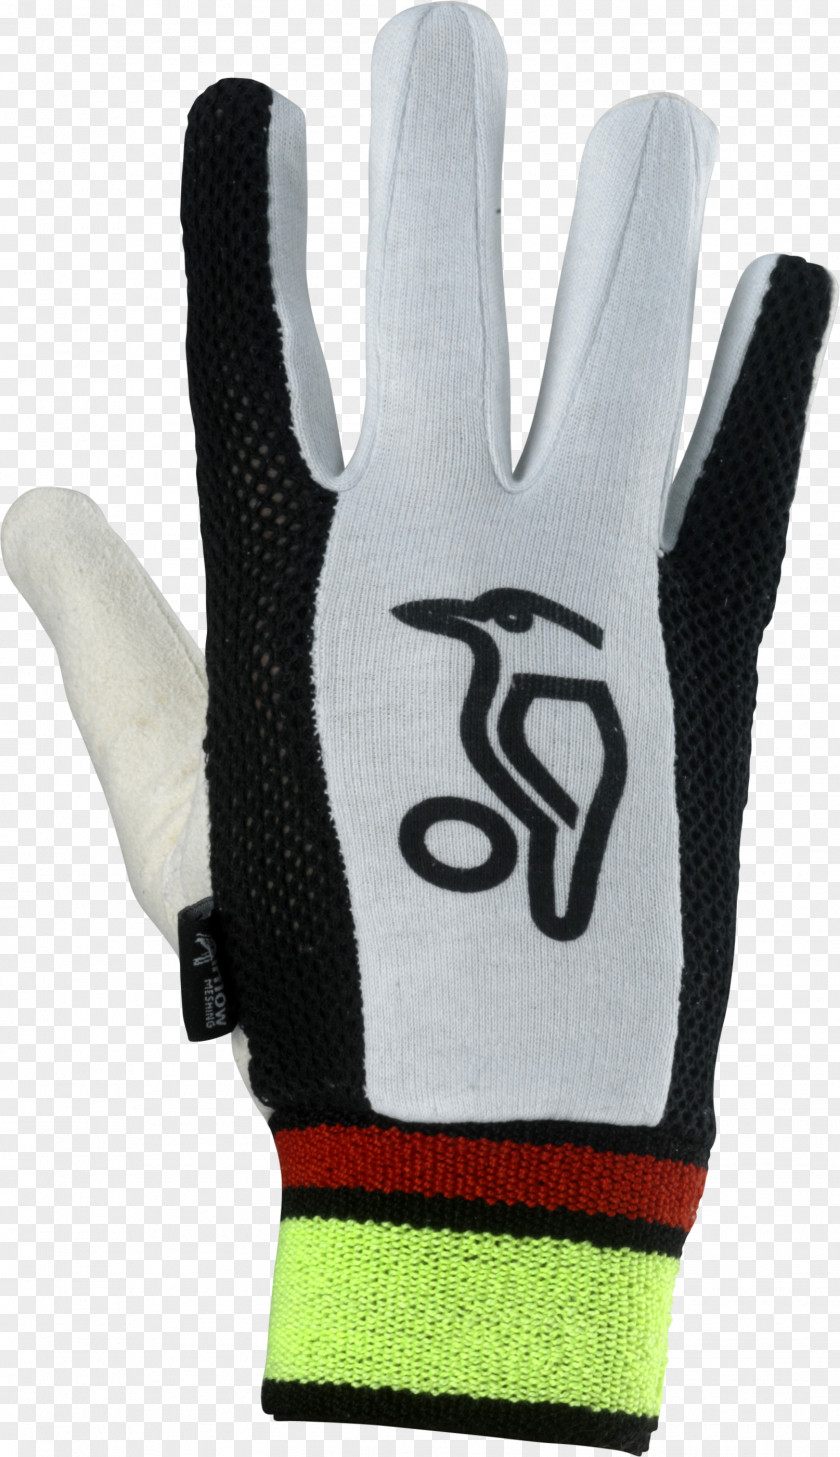 Cricket Lacrosse Glove Cycling Wicket-keeper's Gloves PNG